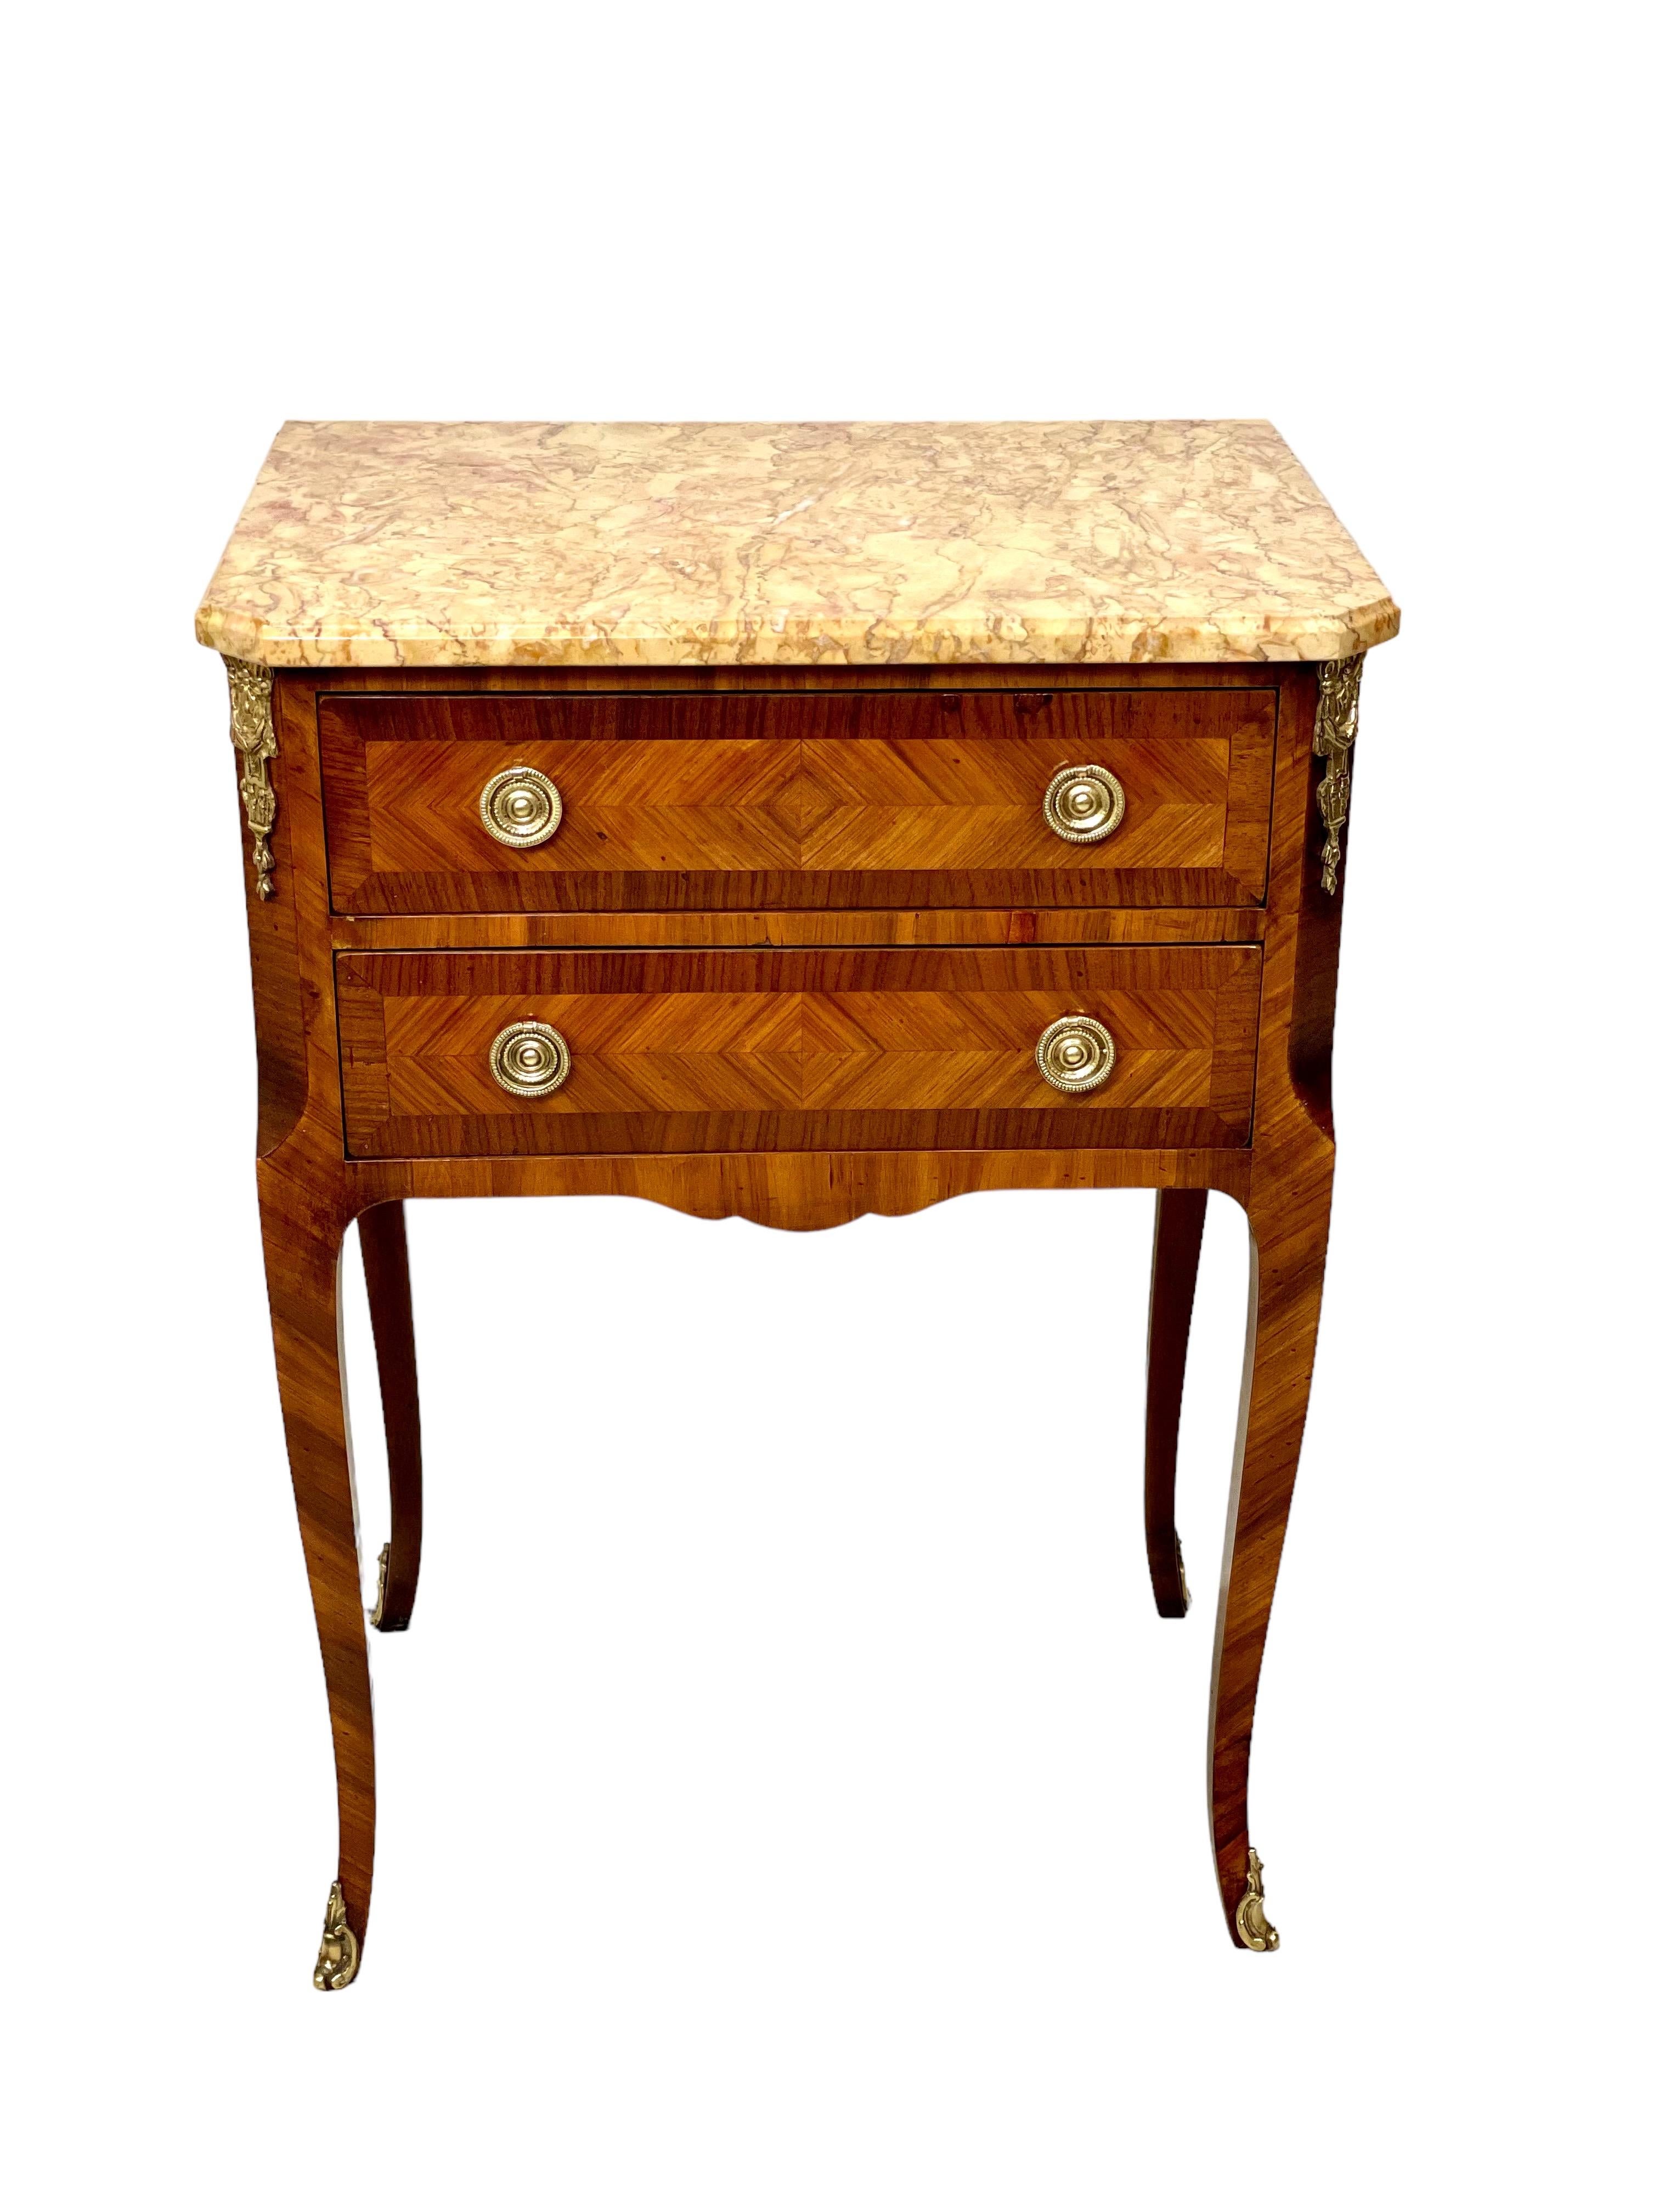 Wood 19th Century French Transition Style Petite Commode with Marble Top For Sale